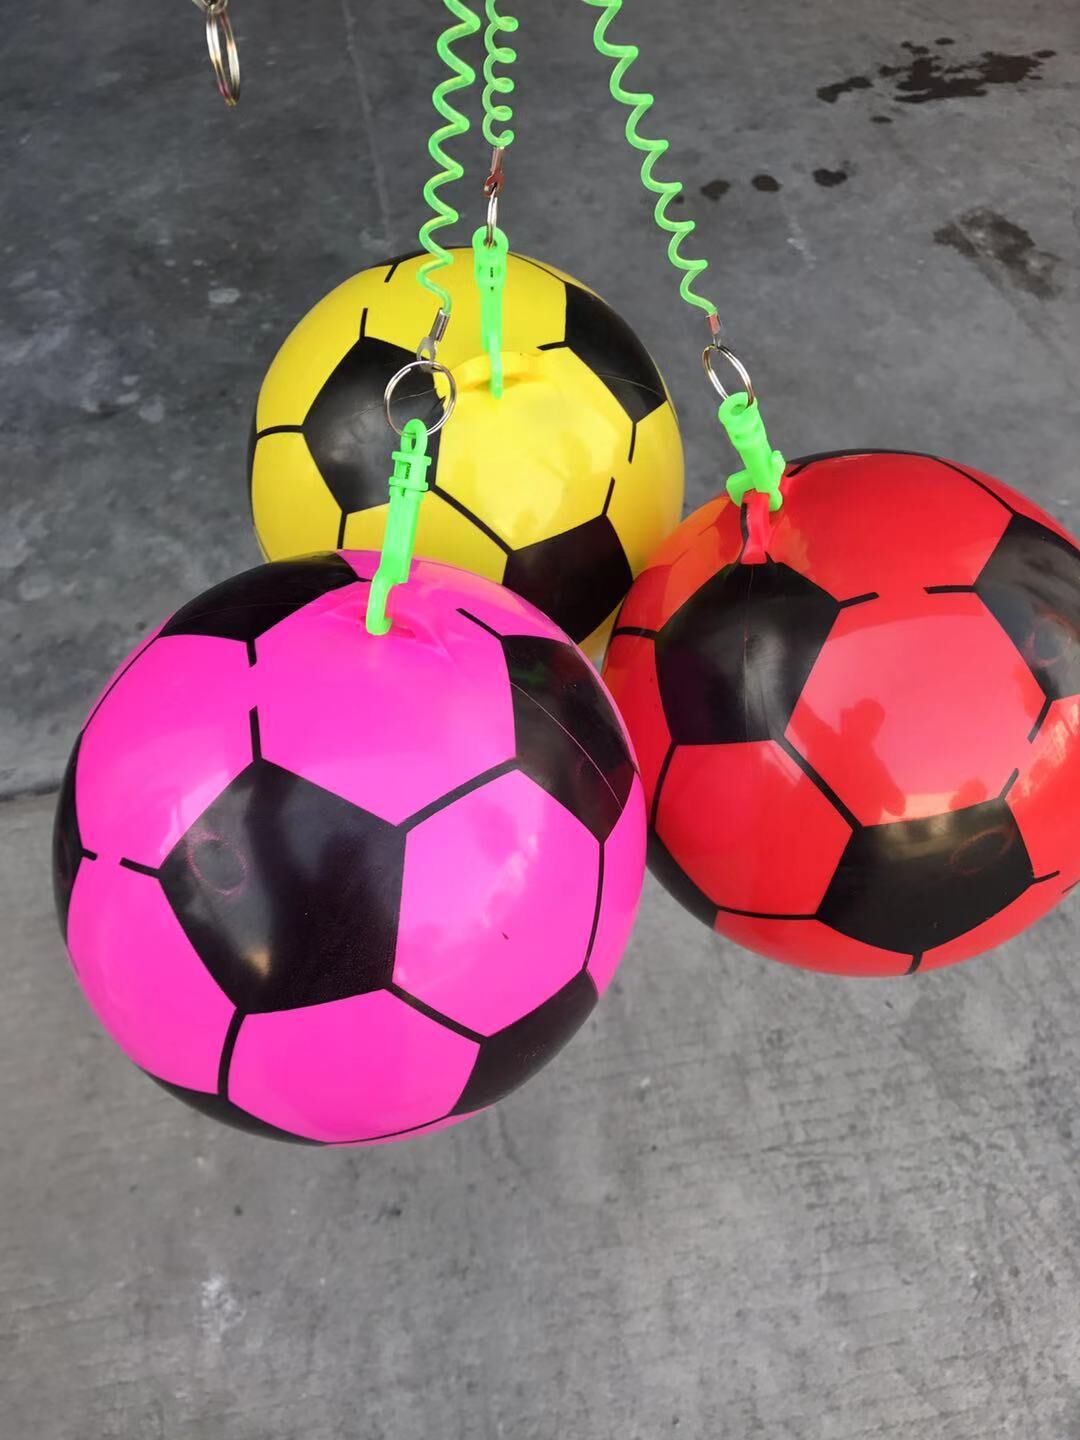 Source Factory 22 Training Practice with Chain Football Children Pvc Inflatable Toys Kindergarten Pat Ball Wholesale